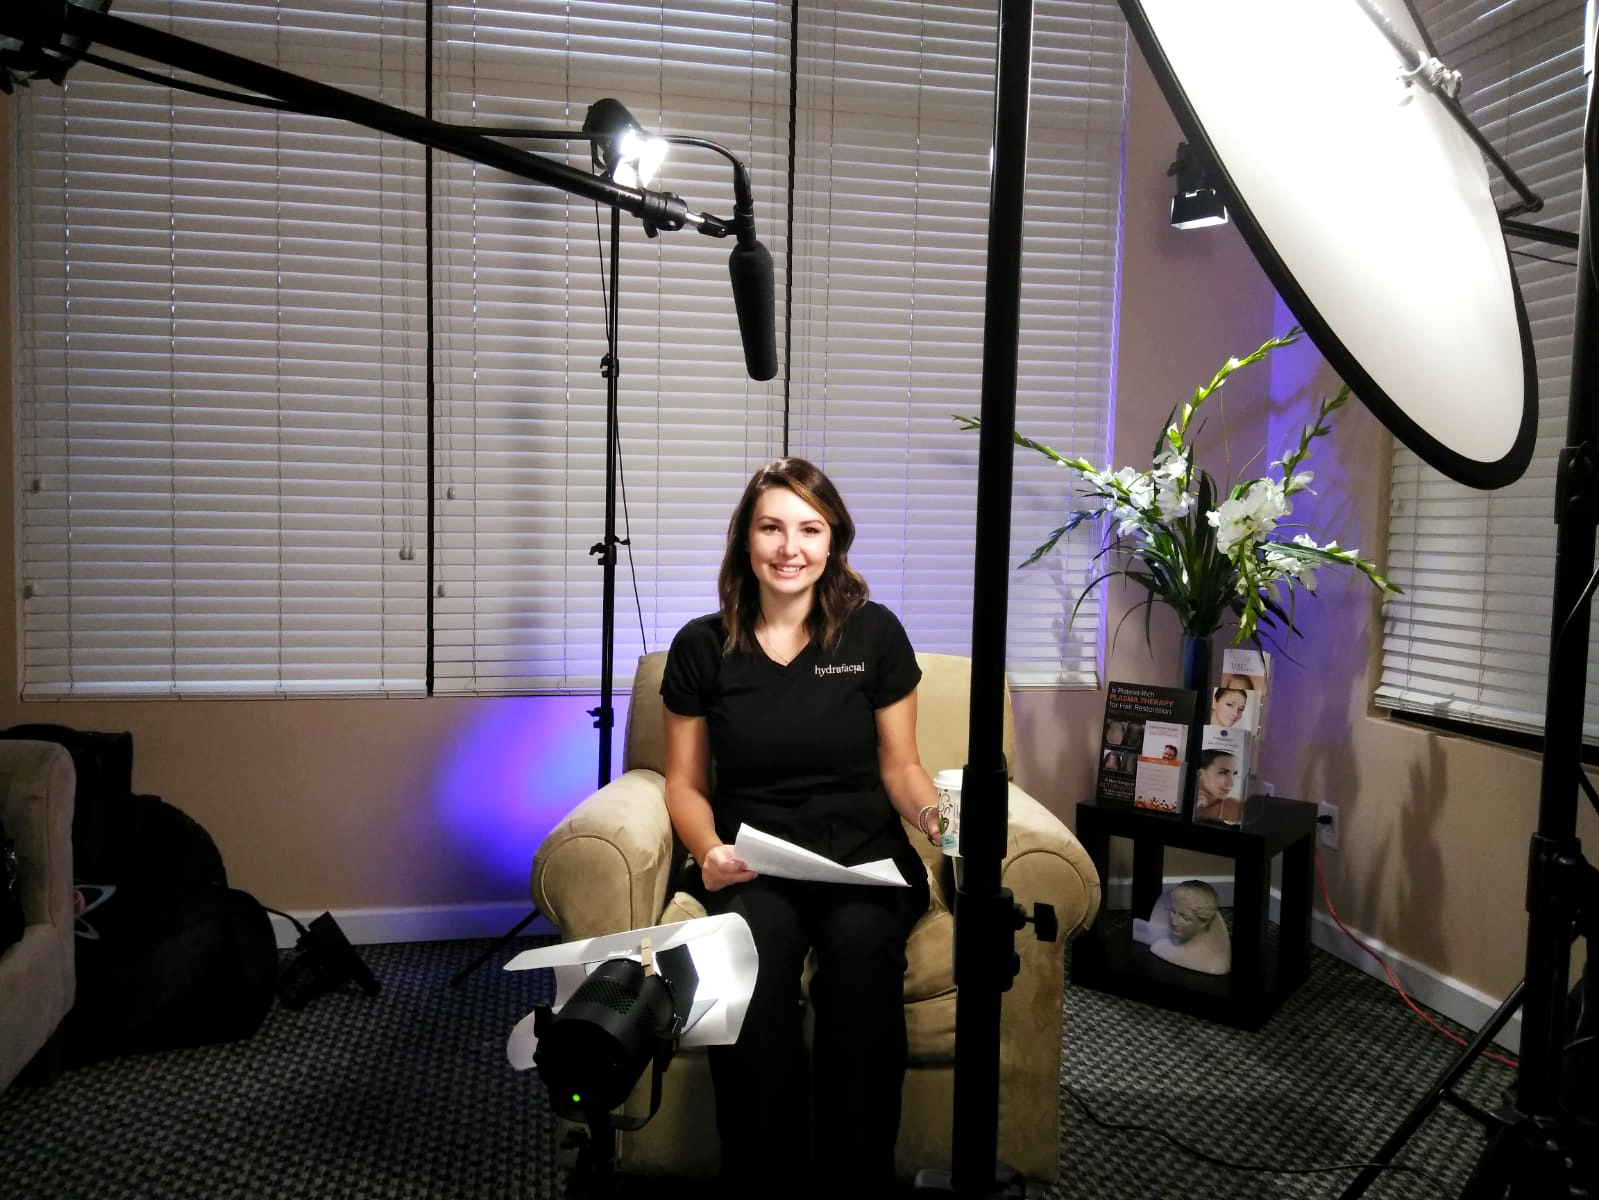 It was a great performance by Nichole Corr-Harris, Licensed Esthetician during filming the interview section of the new Hydrafacial educational video for Riverchase Dermatology in Fort Myers, FL.